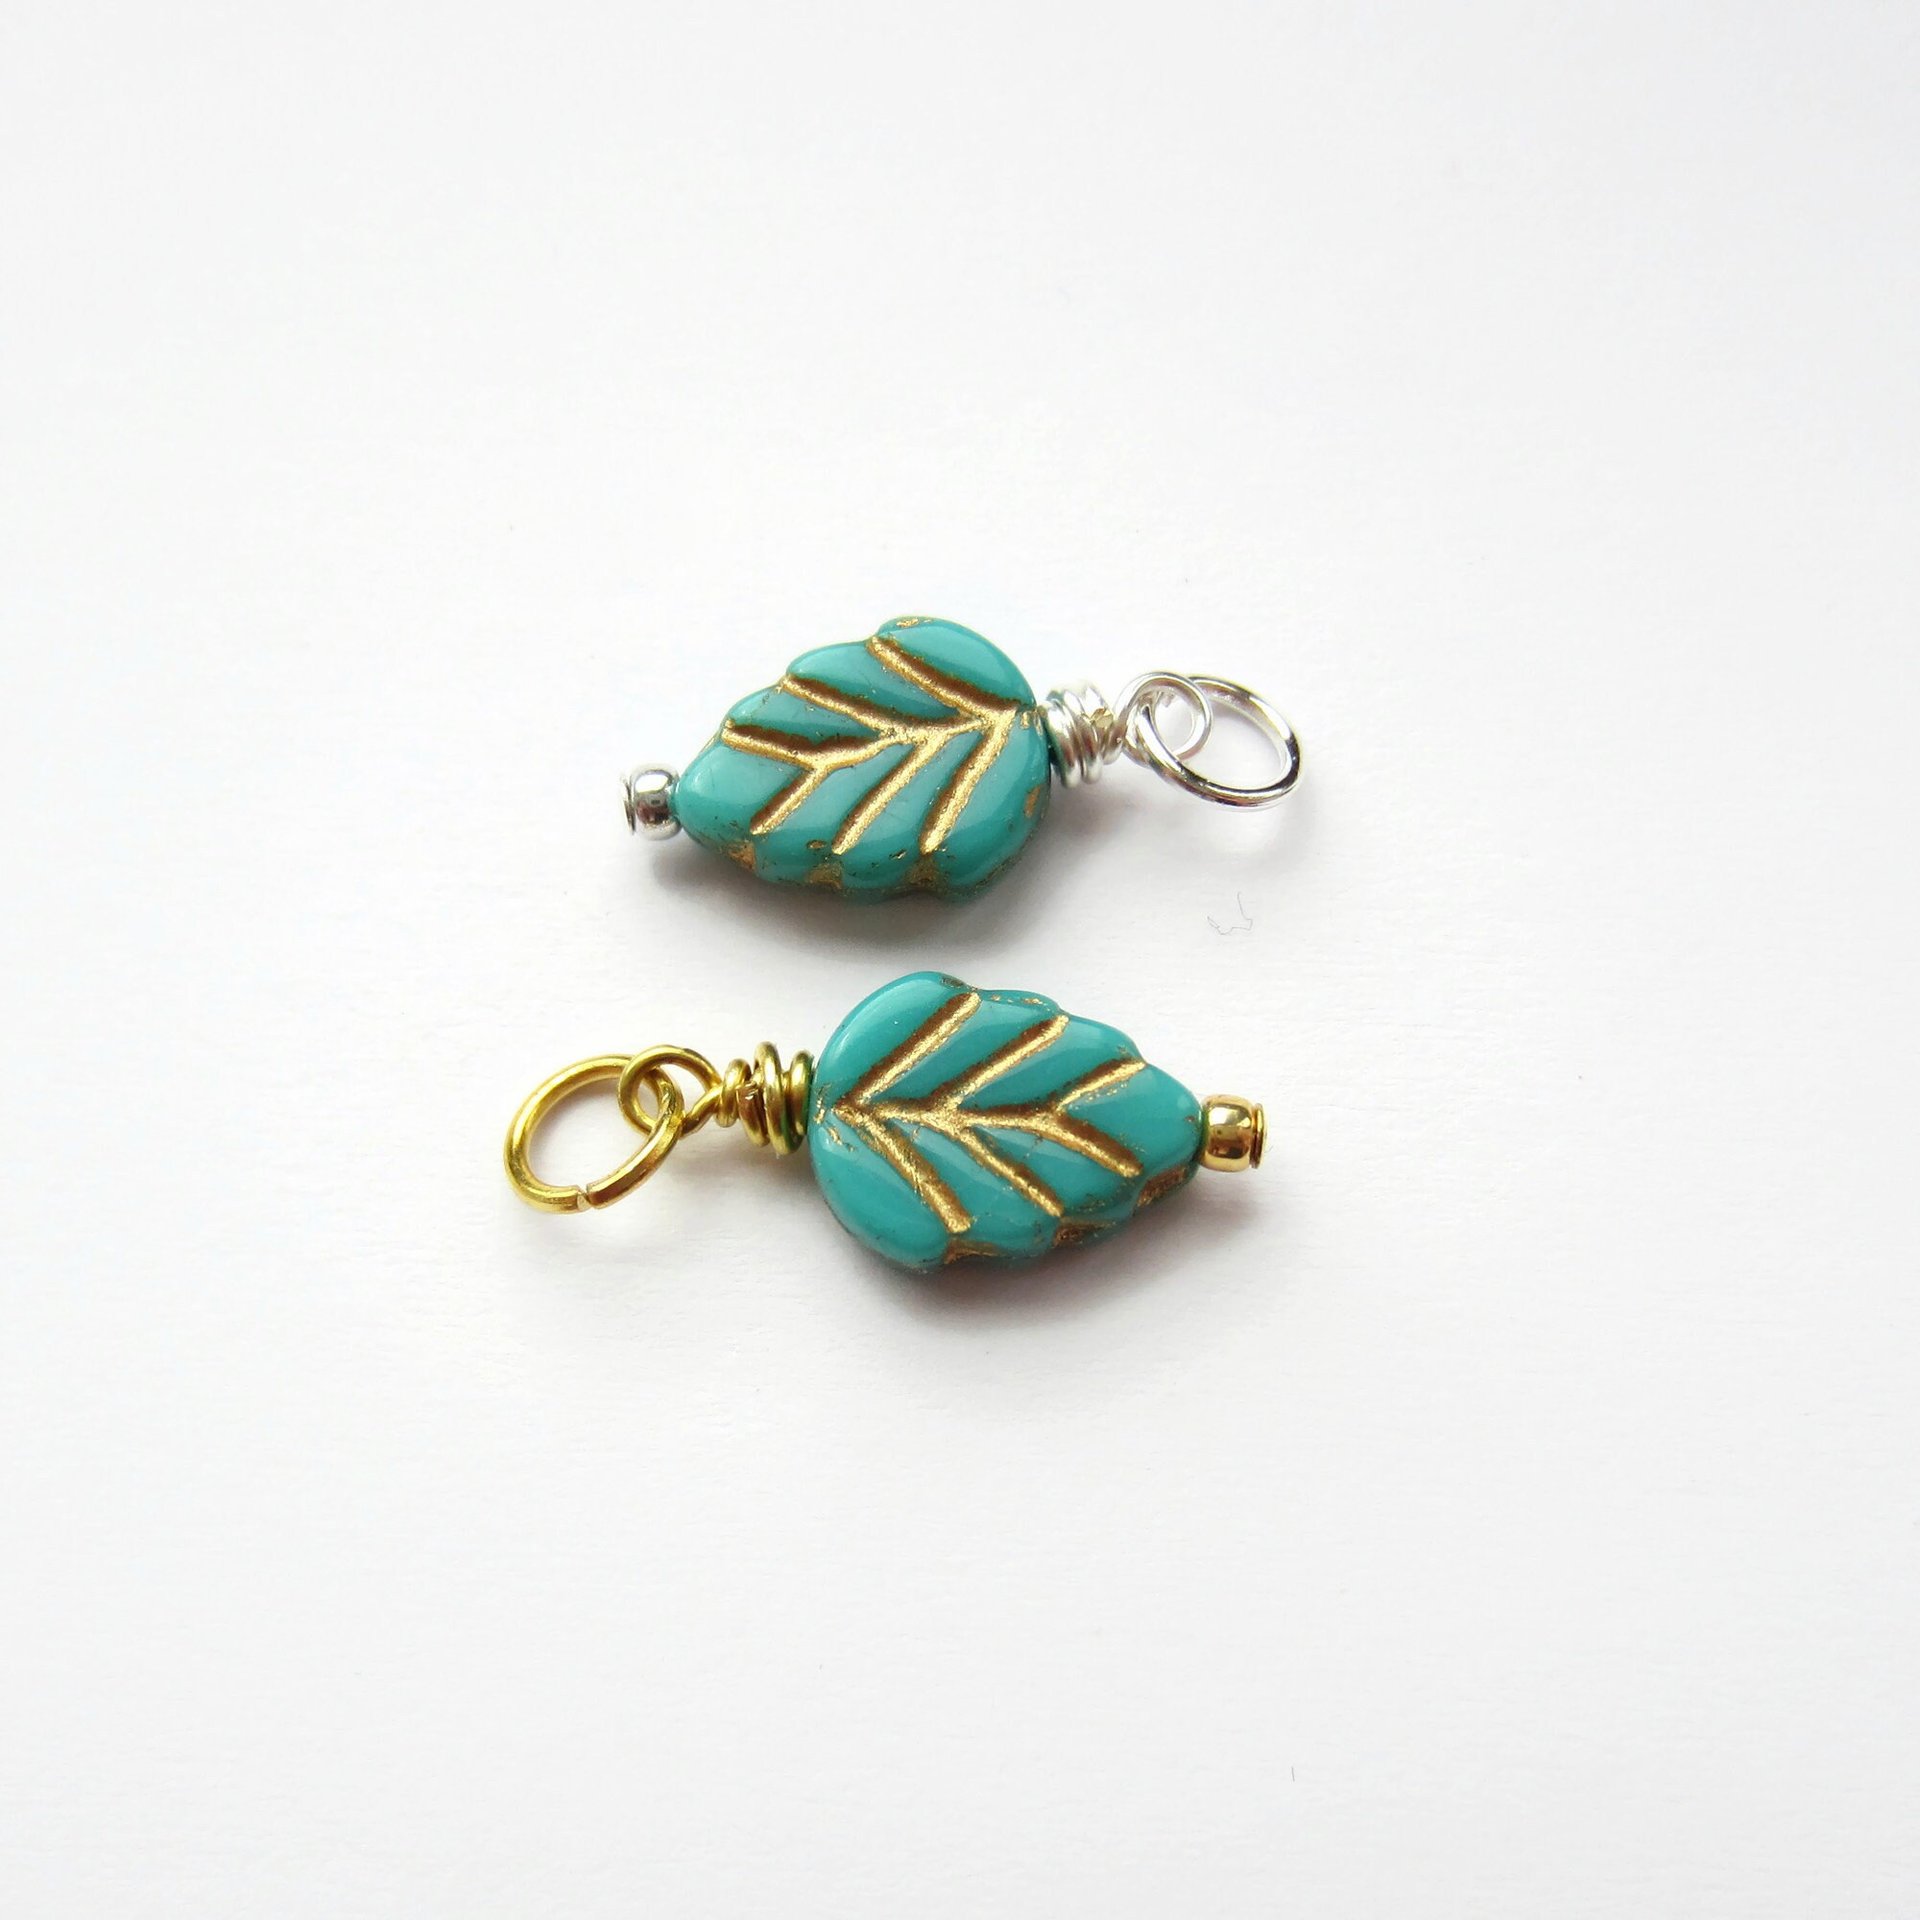 Turquoise Blue and Gold Czech Glass Leaf Charm ~ Handmade by The Tiny Tree Frog Jewellery